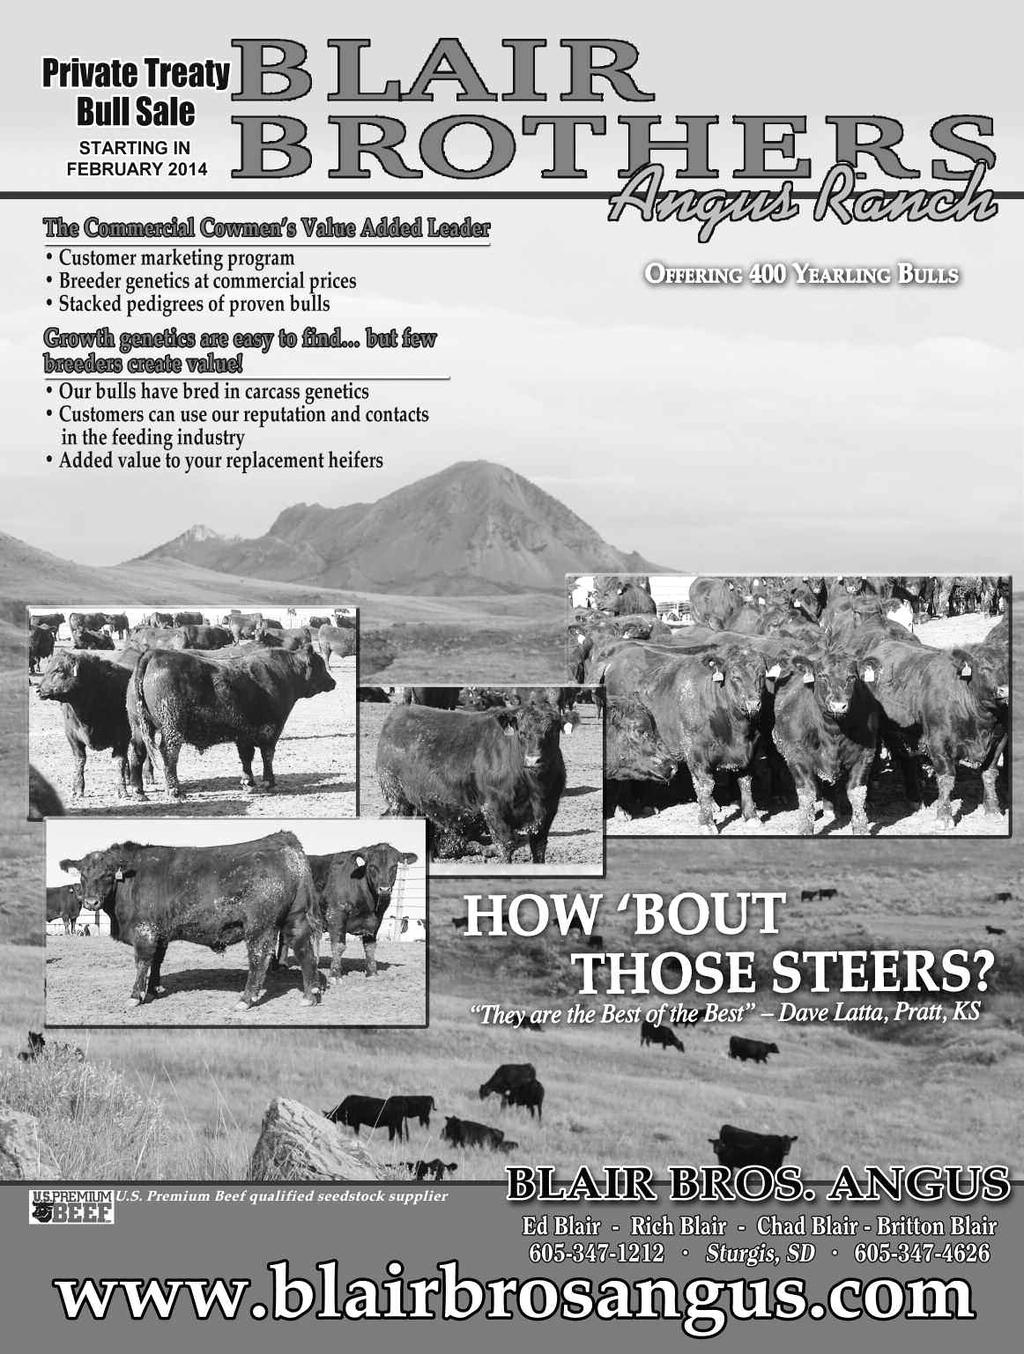 Sired by these breed leading proven Sires: GAR Expectation 4915 Sinclair Extra 4x13 US Premium Beef GAR Prophet AAR 10X